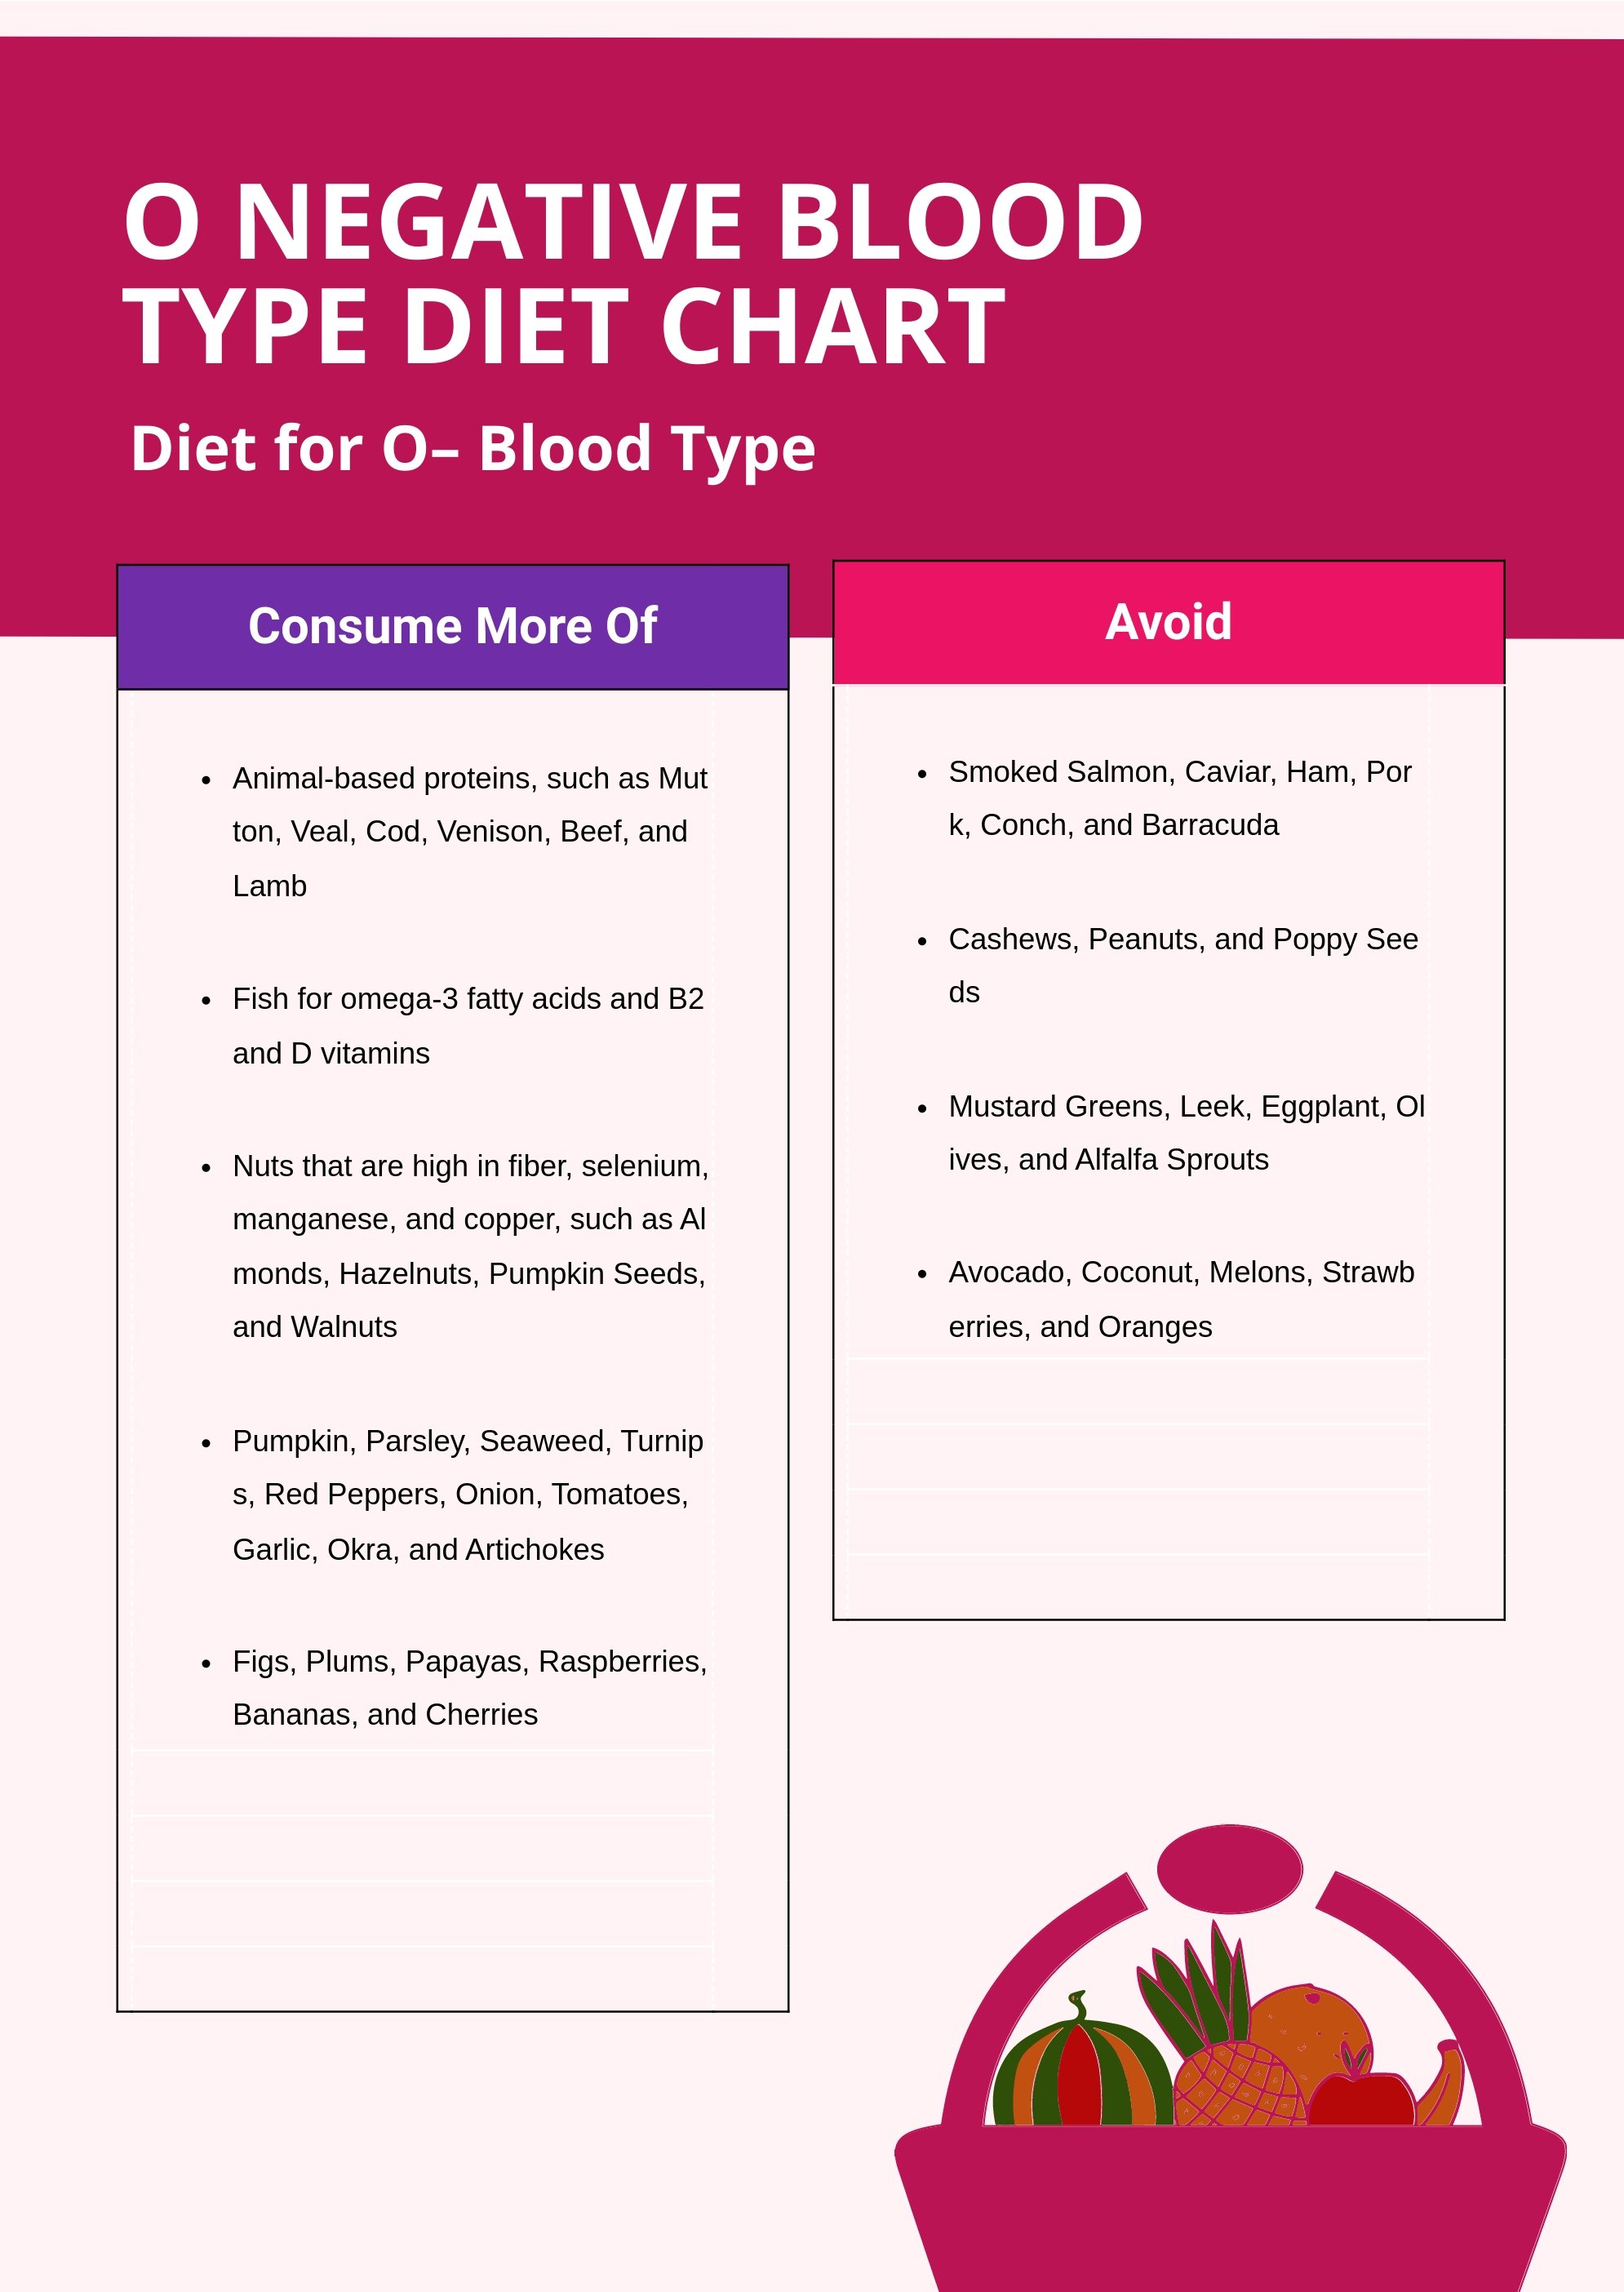 O Negative Blood Type Diet Chart